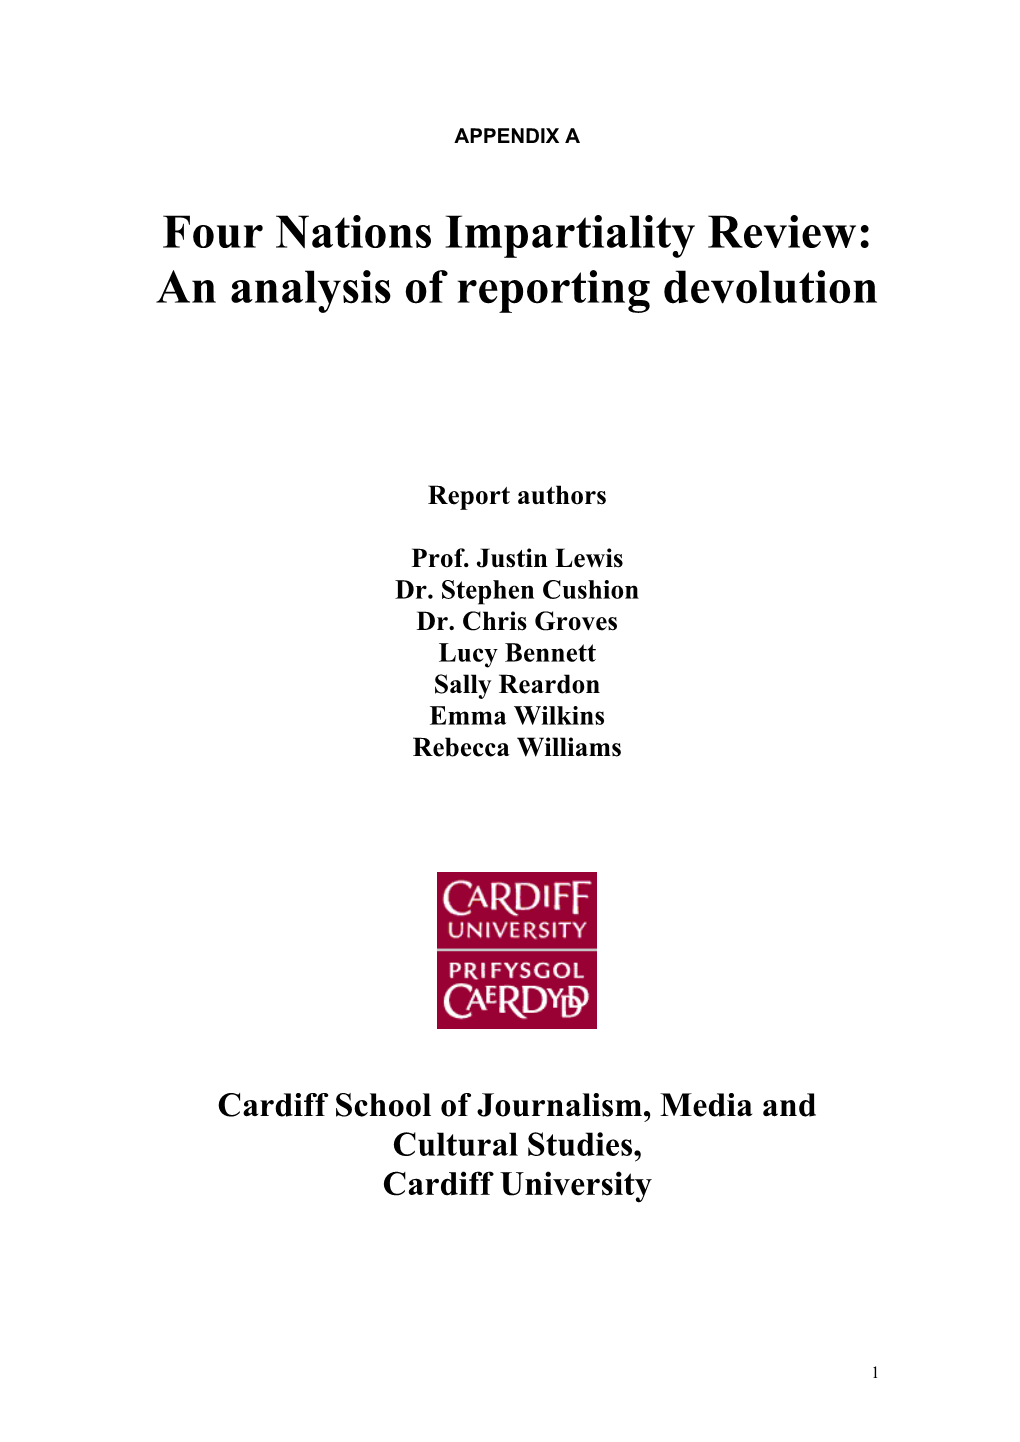 Four Nations Impartiality Review: an Analysis of Reporting Devolution